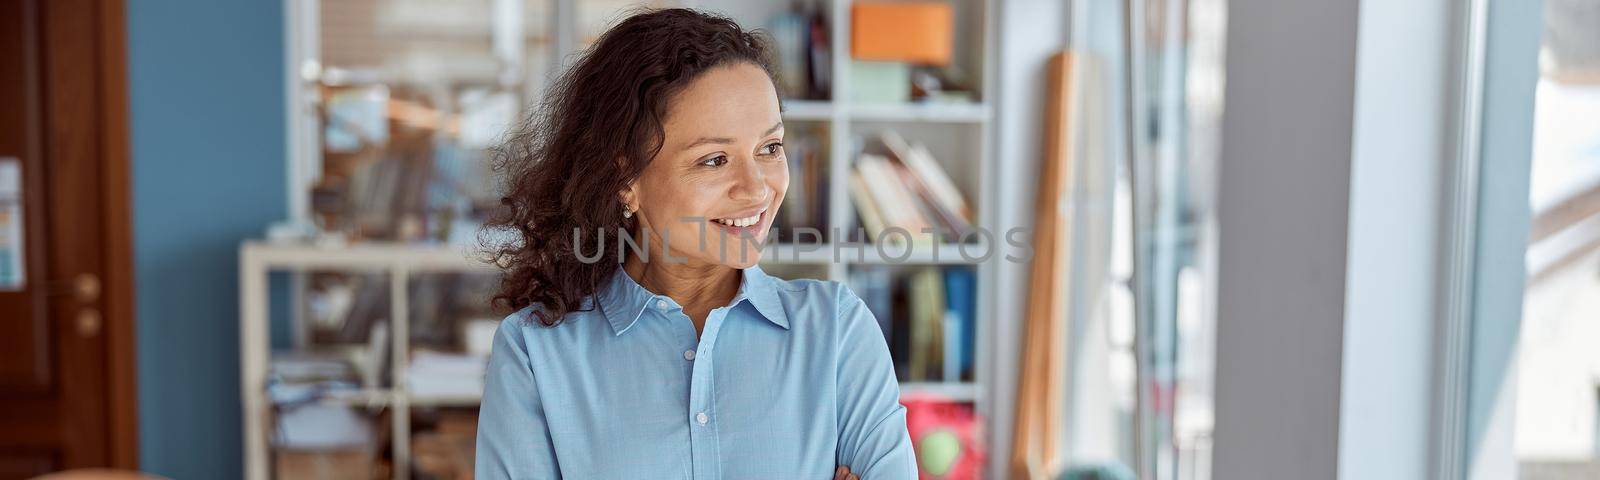 young beautiful smiling professional african american teacher portrait in school classroom by Yaroslav_astakhov